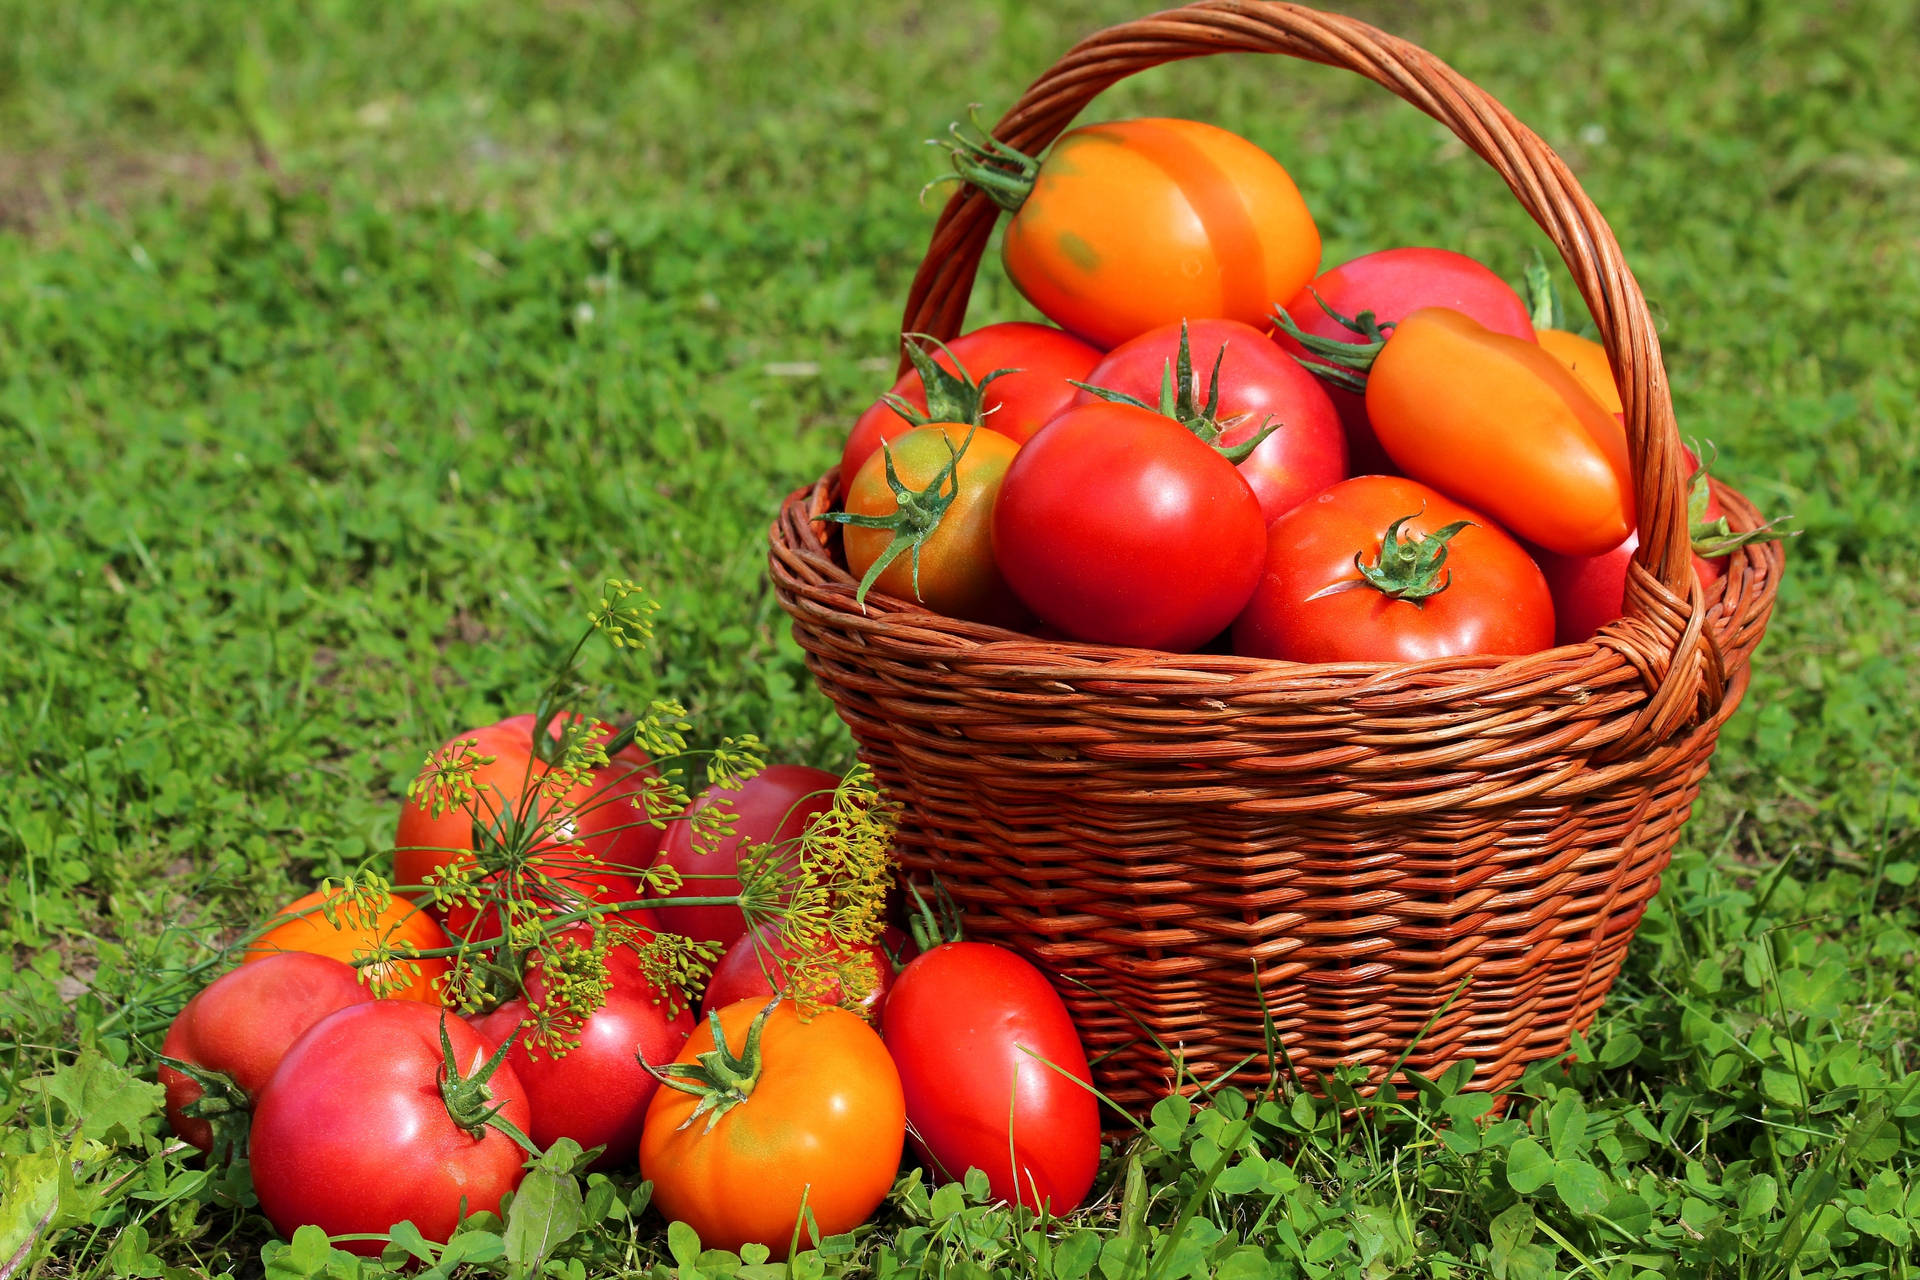 Different Tomato Fruits Outdoor Photoshoot Wallpaper